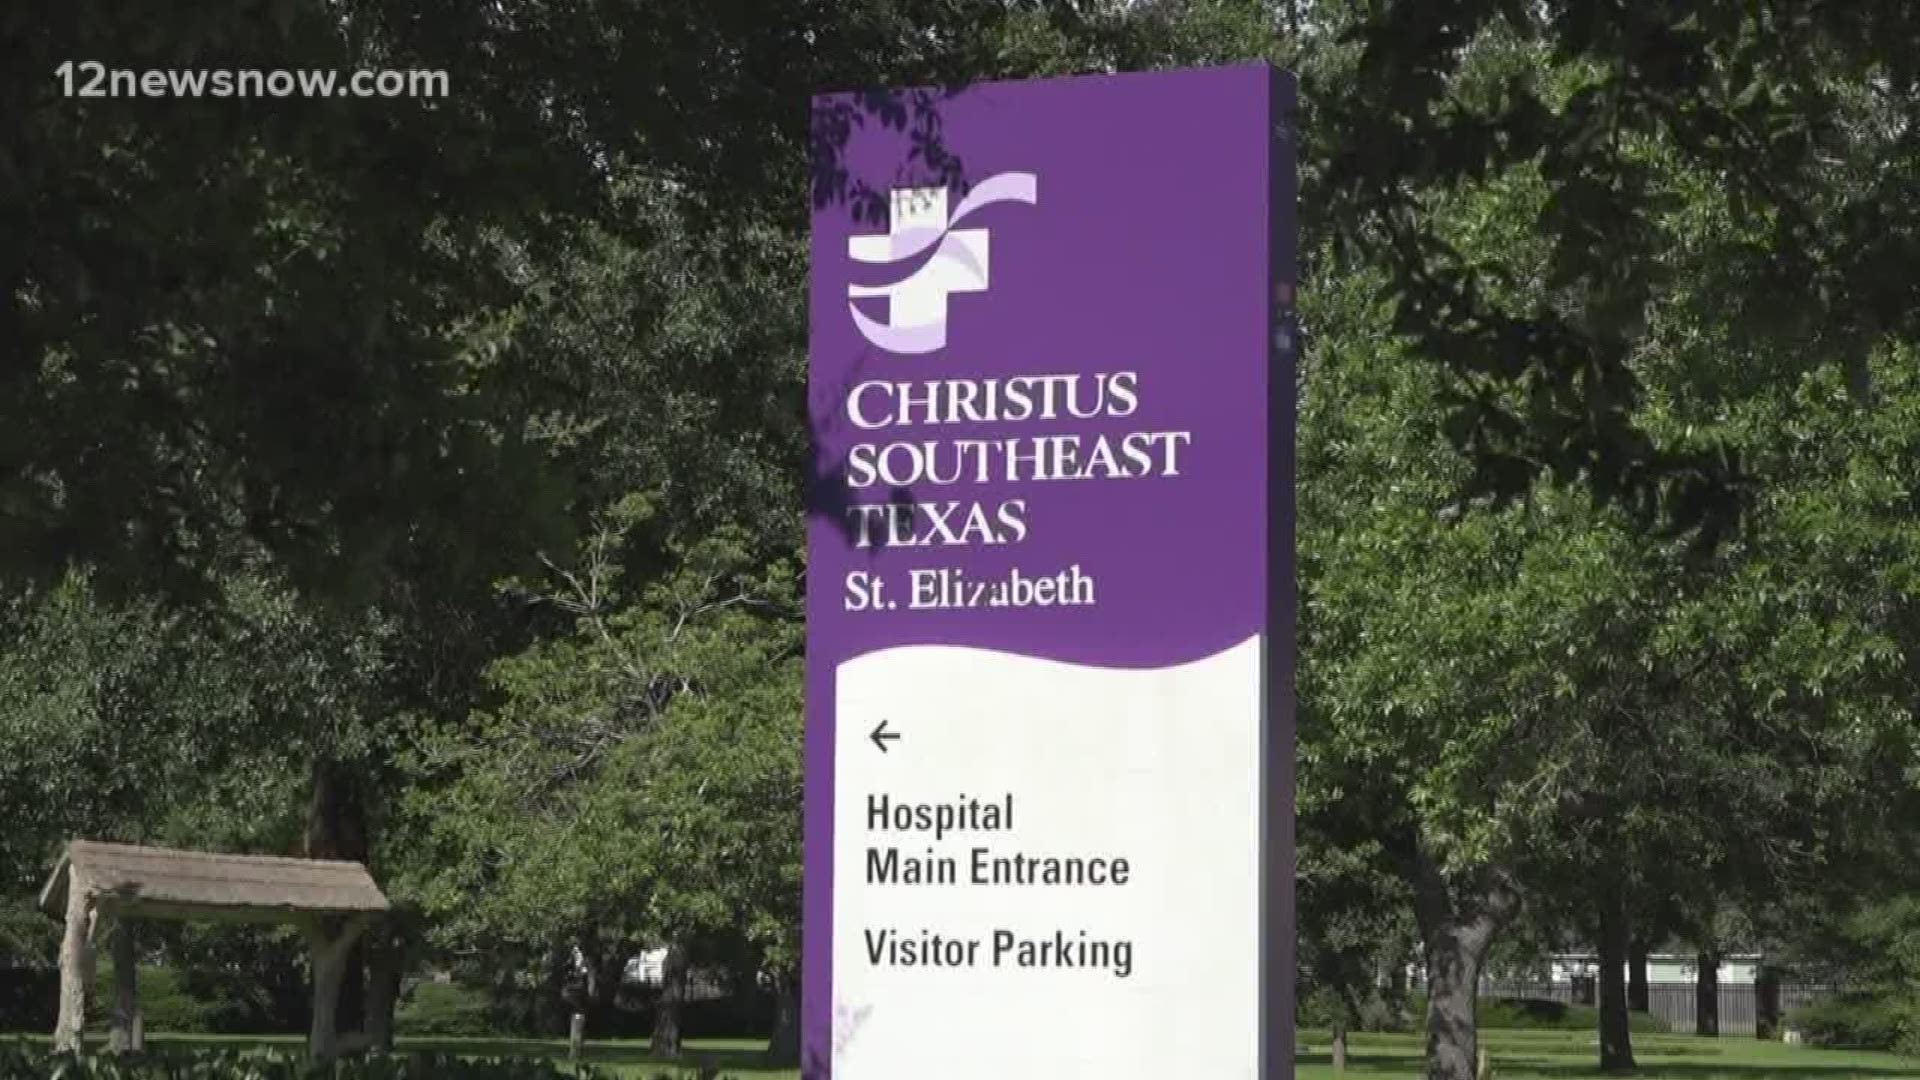 Security officers at CHRISTUS Southeast Texas will also receive new uniforms, marked vehicles and body armor which law enforcement previously only had access to.